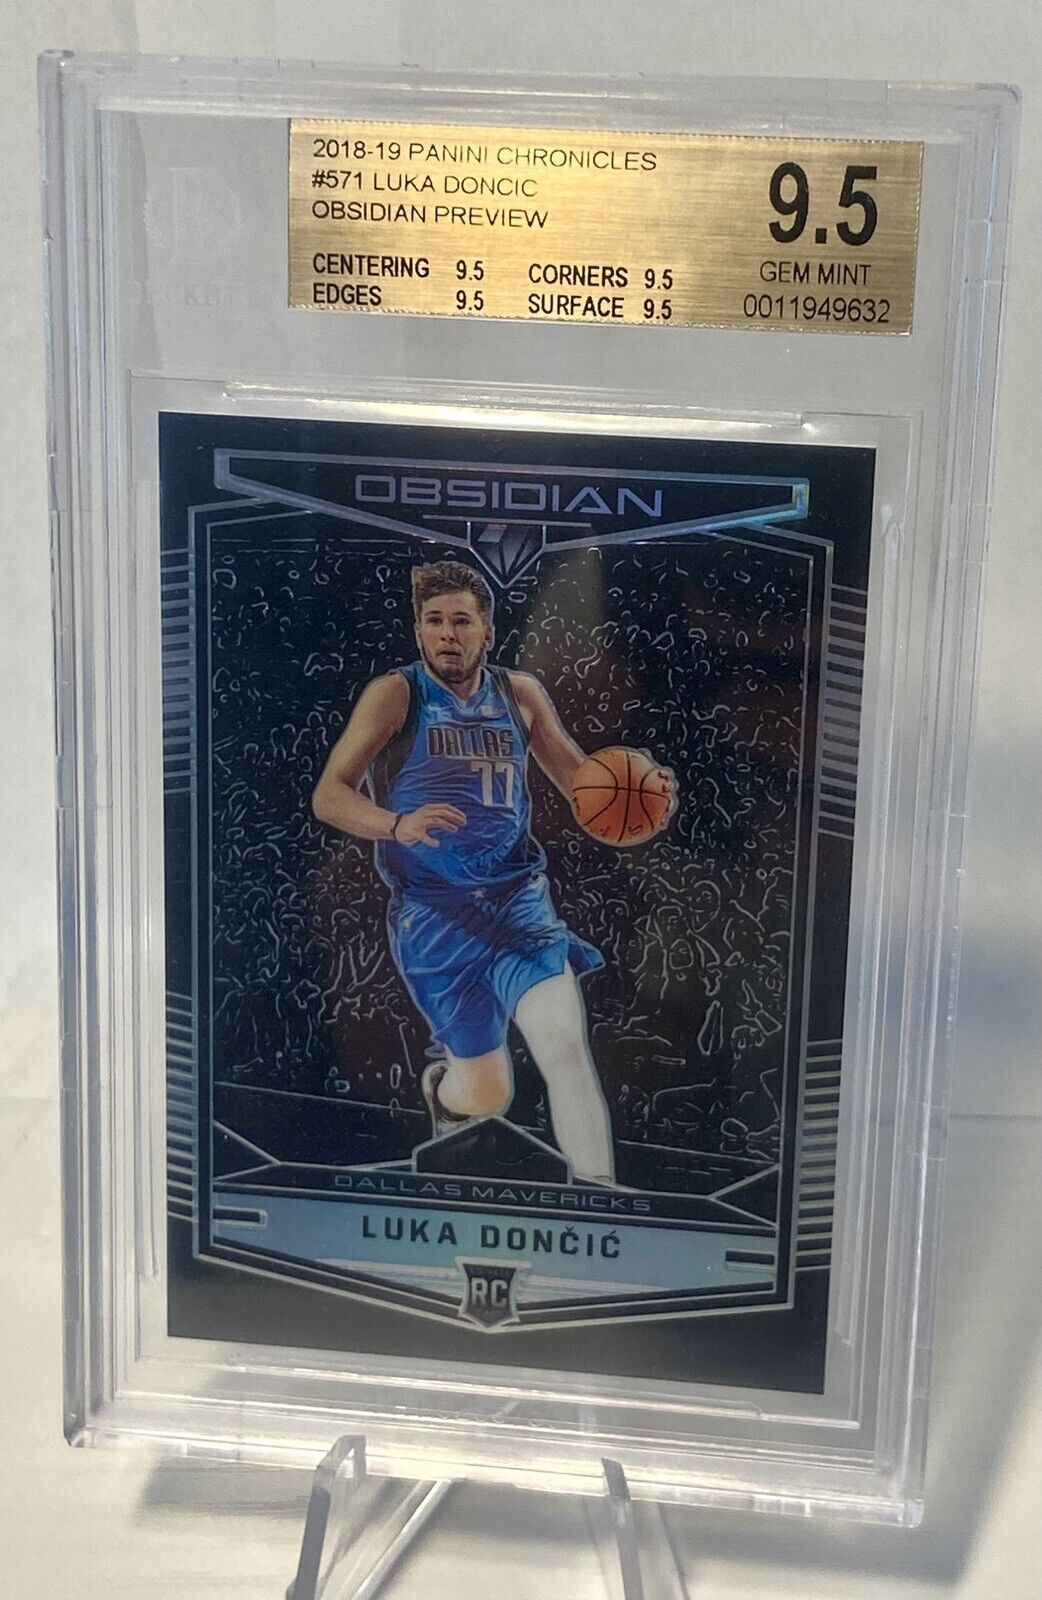 2018-19 Panini Chronicles Luka Doncic Obsidian Preview Rookie RC BGS 9.5 